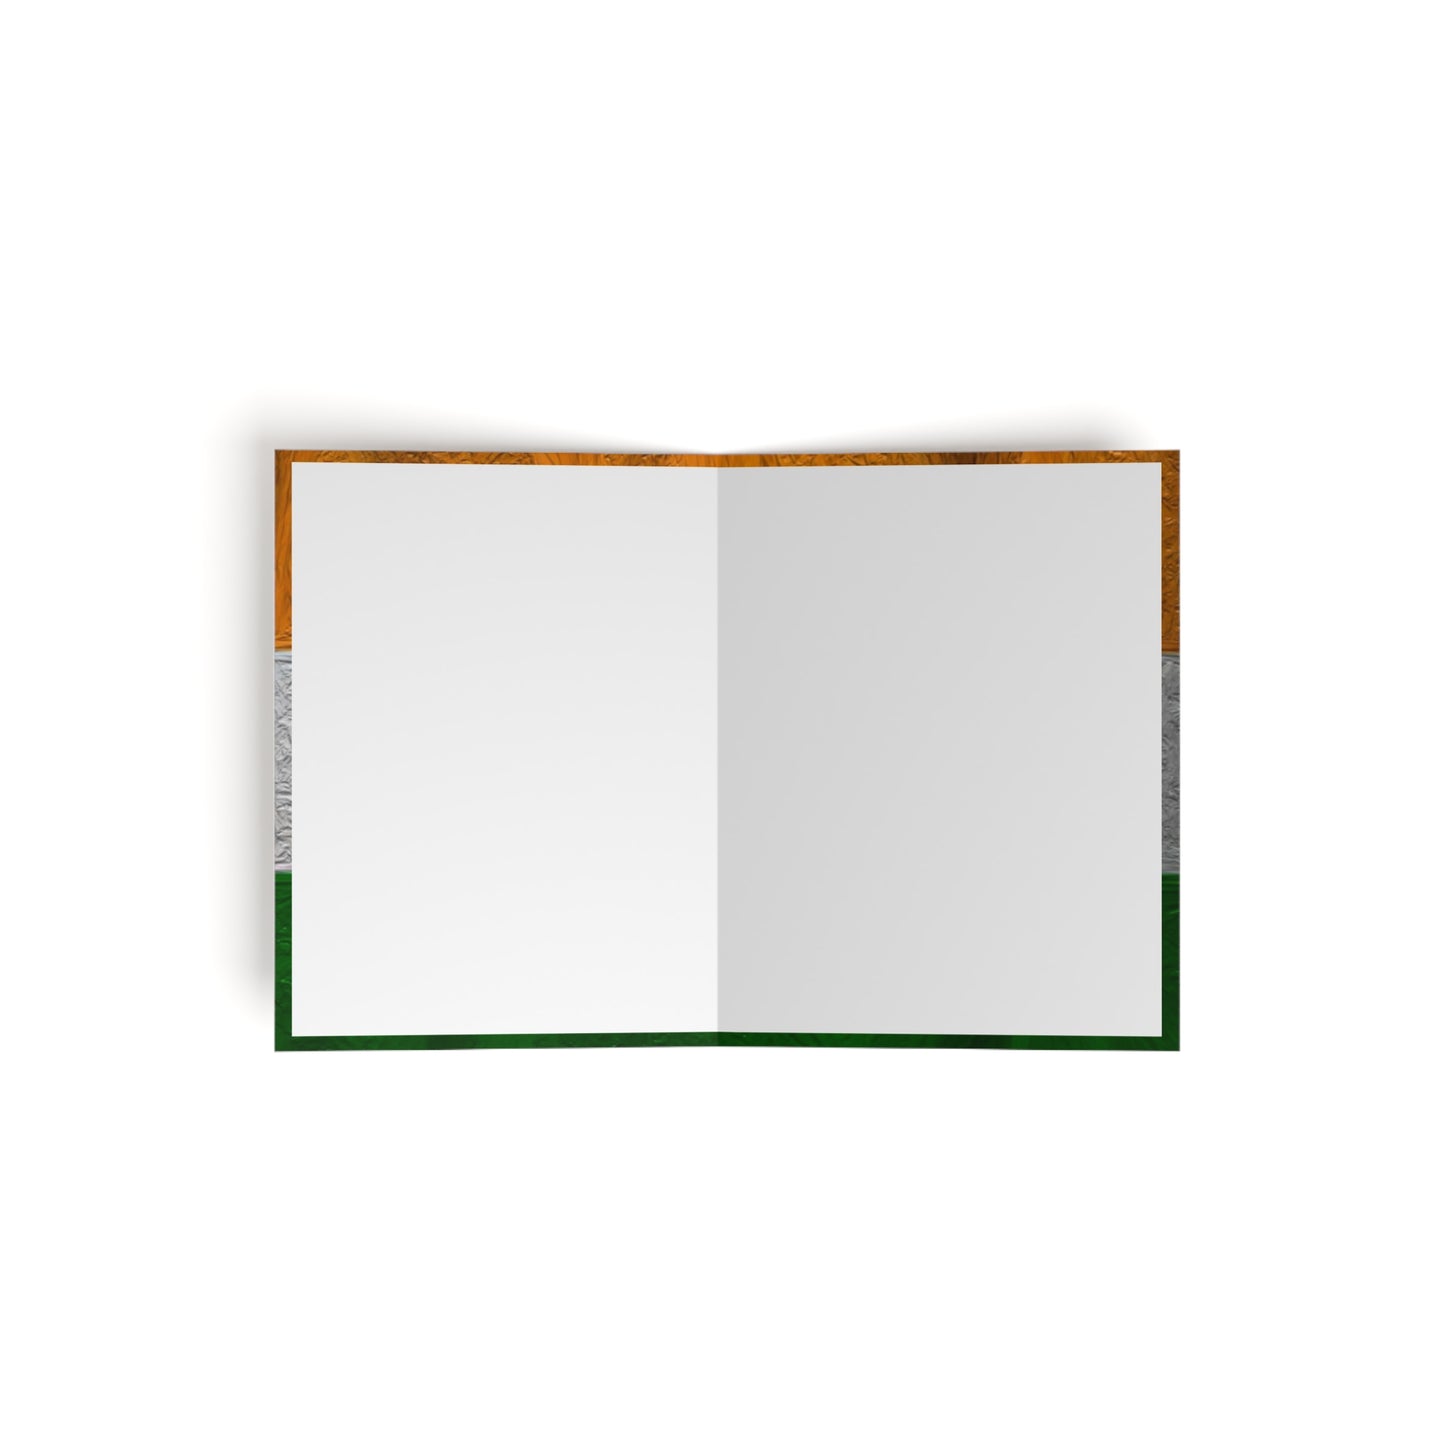 India Flag Greeting Cards